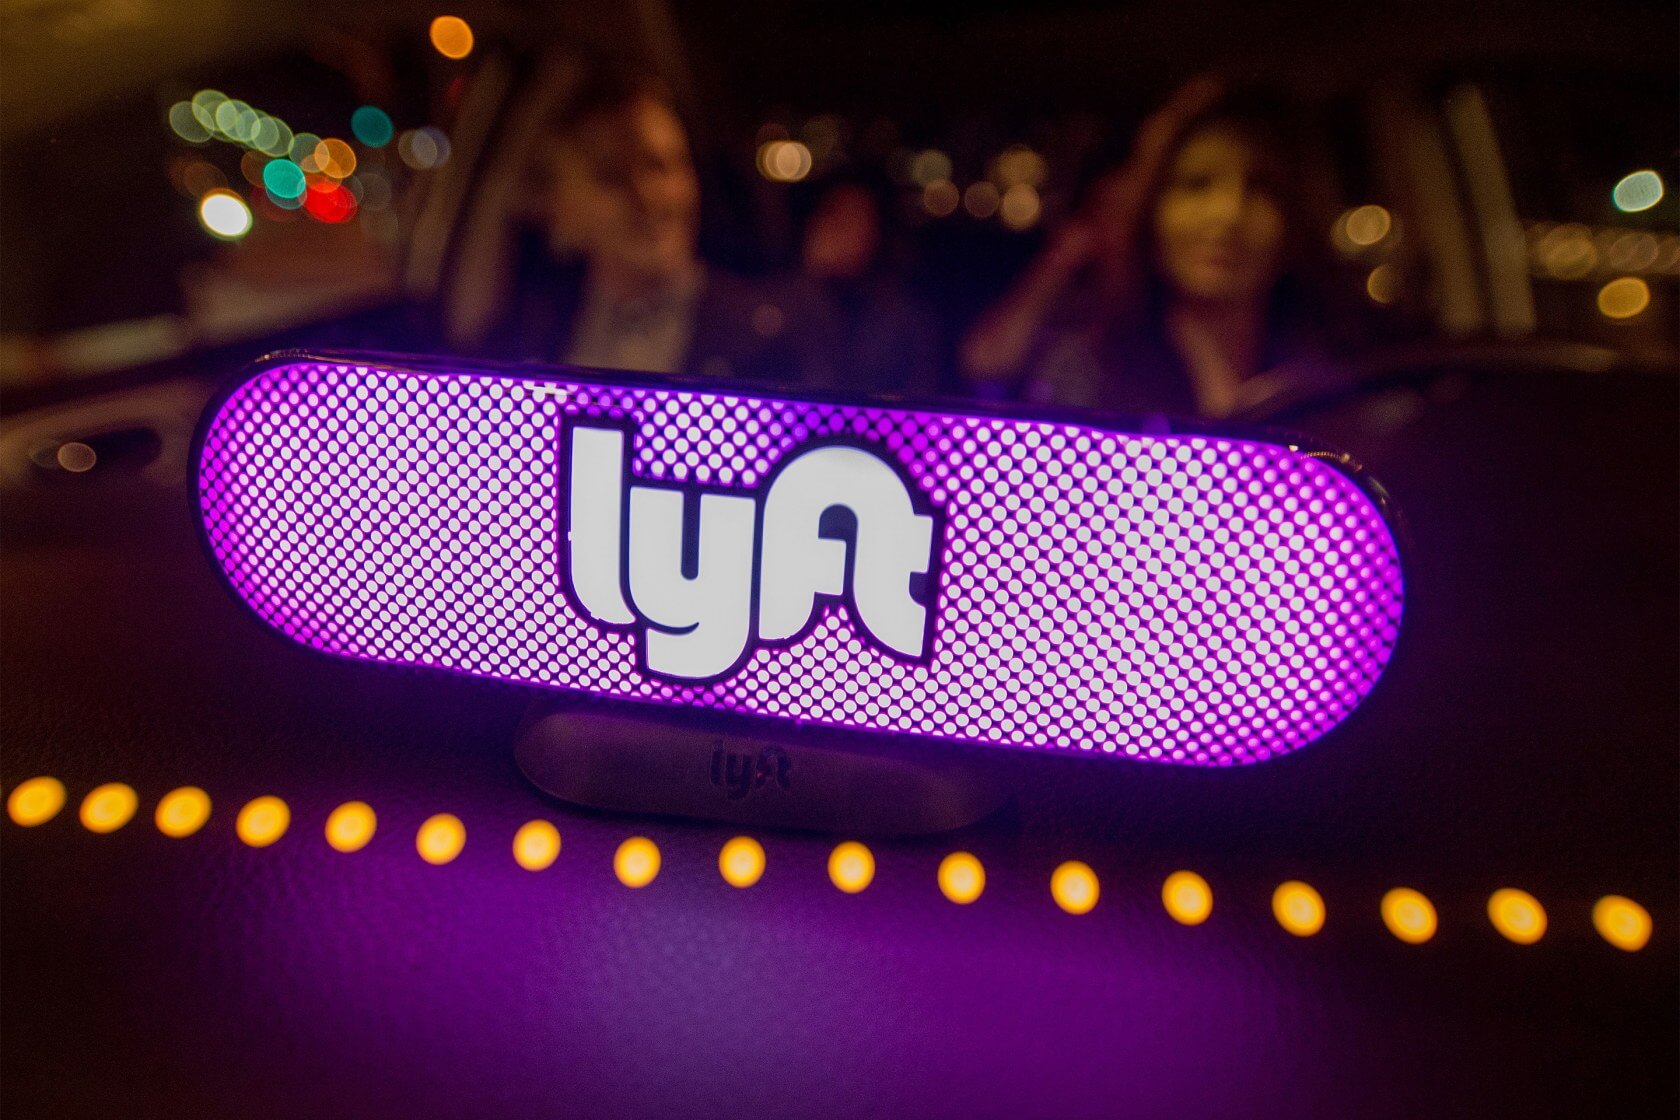 Lyft lays off 17 percent of its workforce, institutes pay cuts for remaining employees